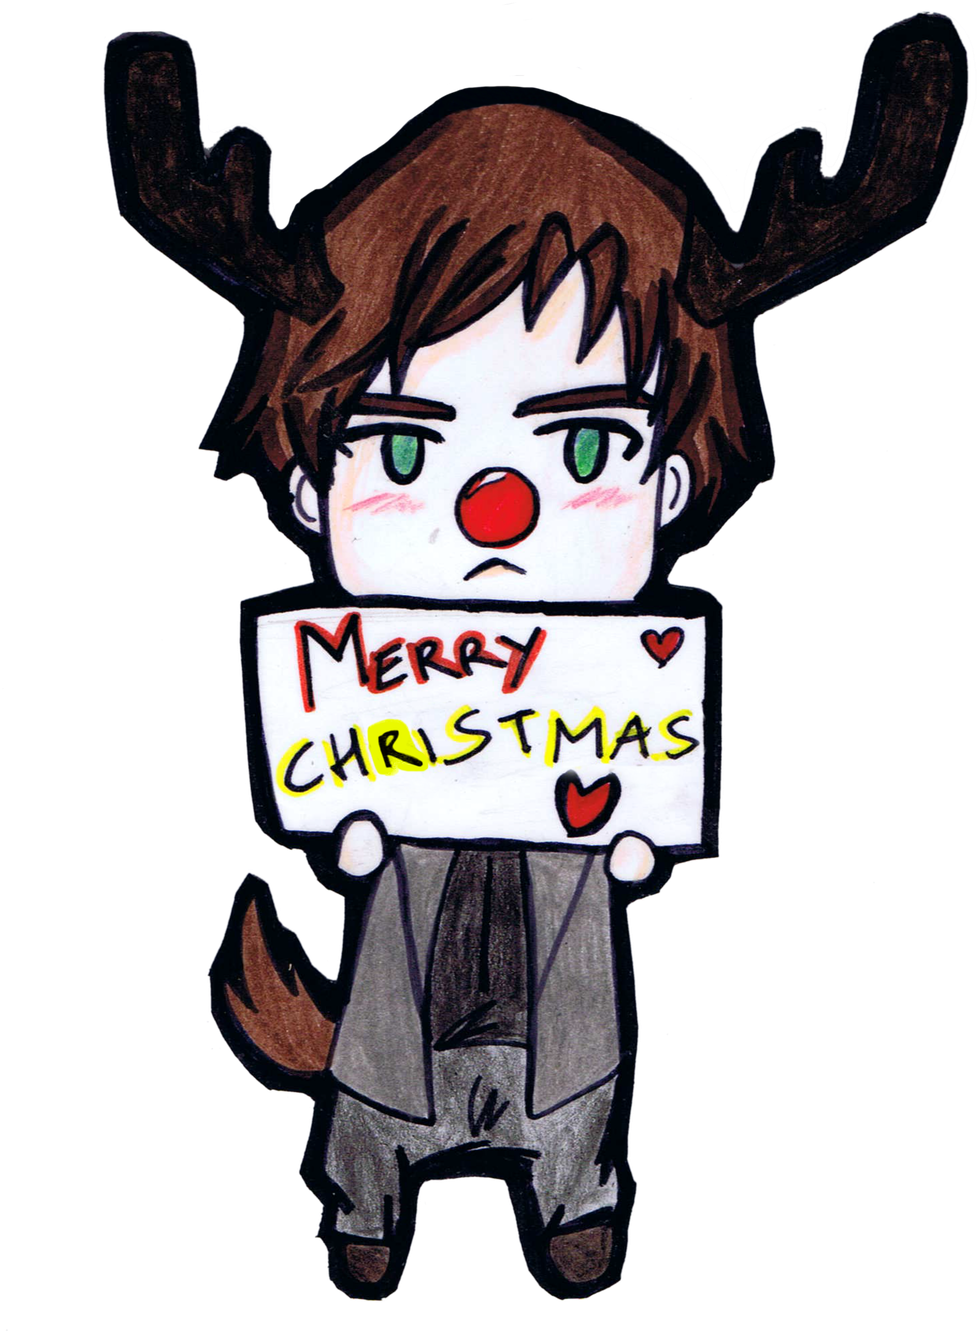 Alan Wish You A Merry Christmas By Emme-gray - Cartoon (1024x1463)